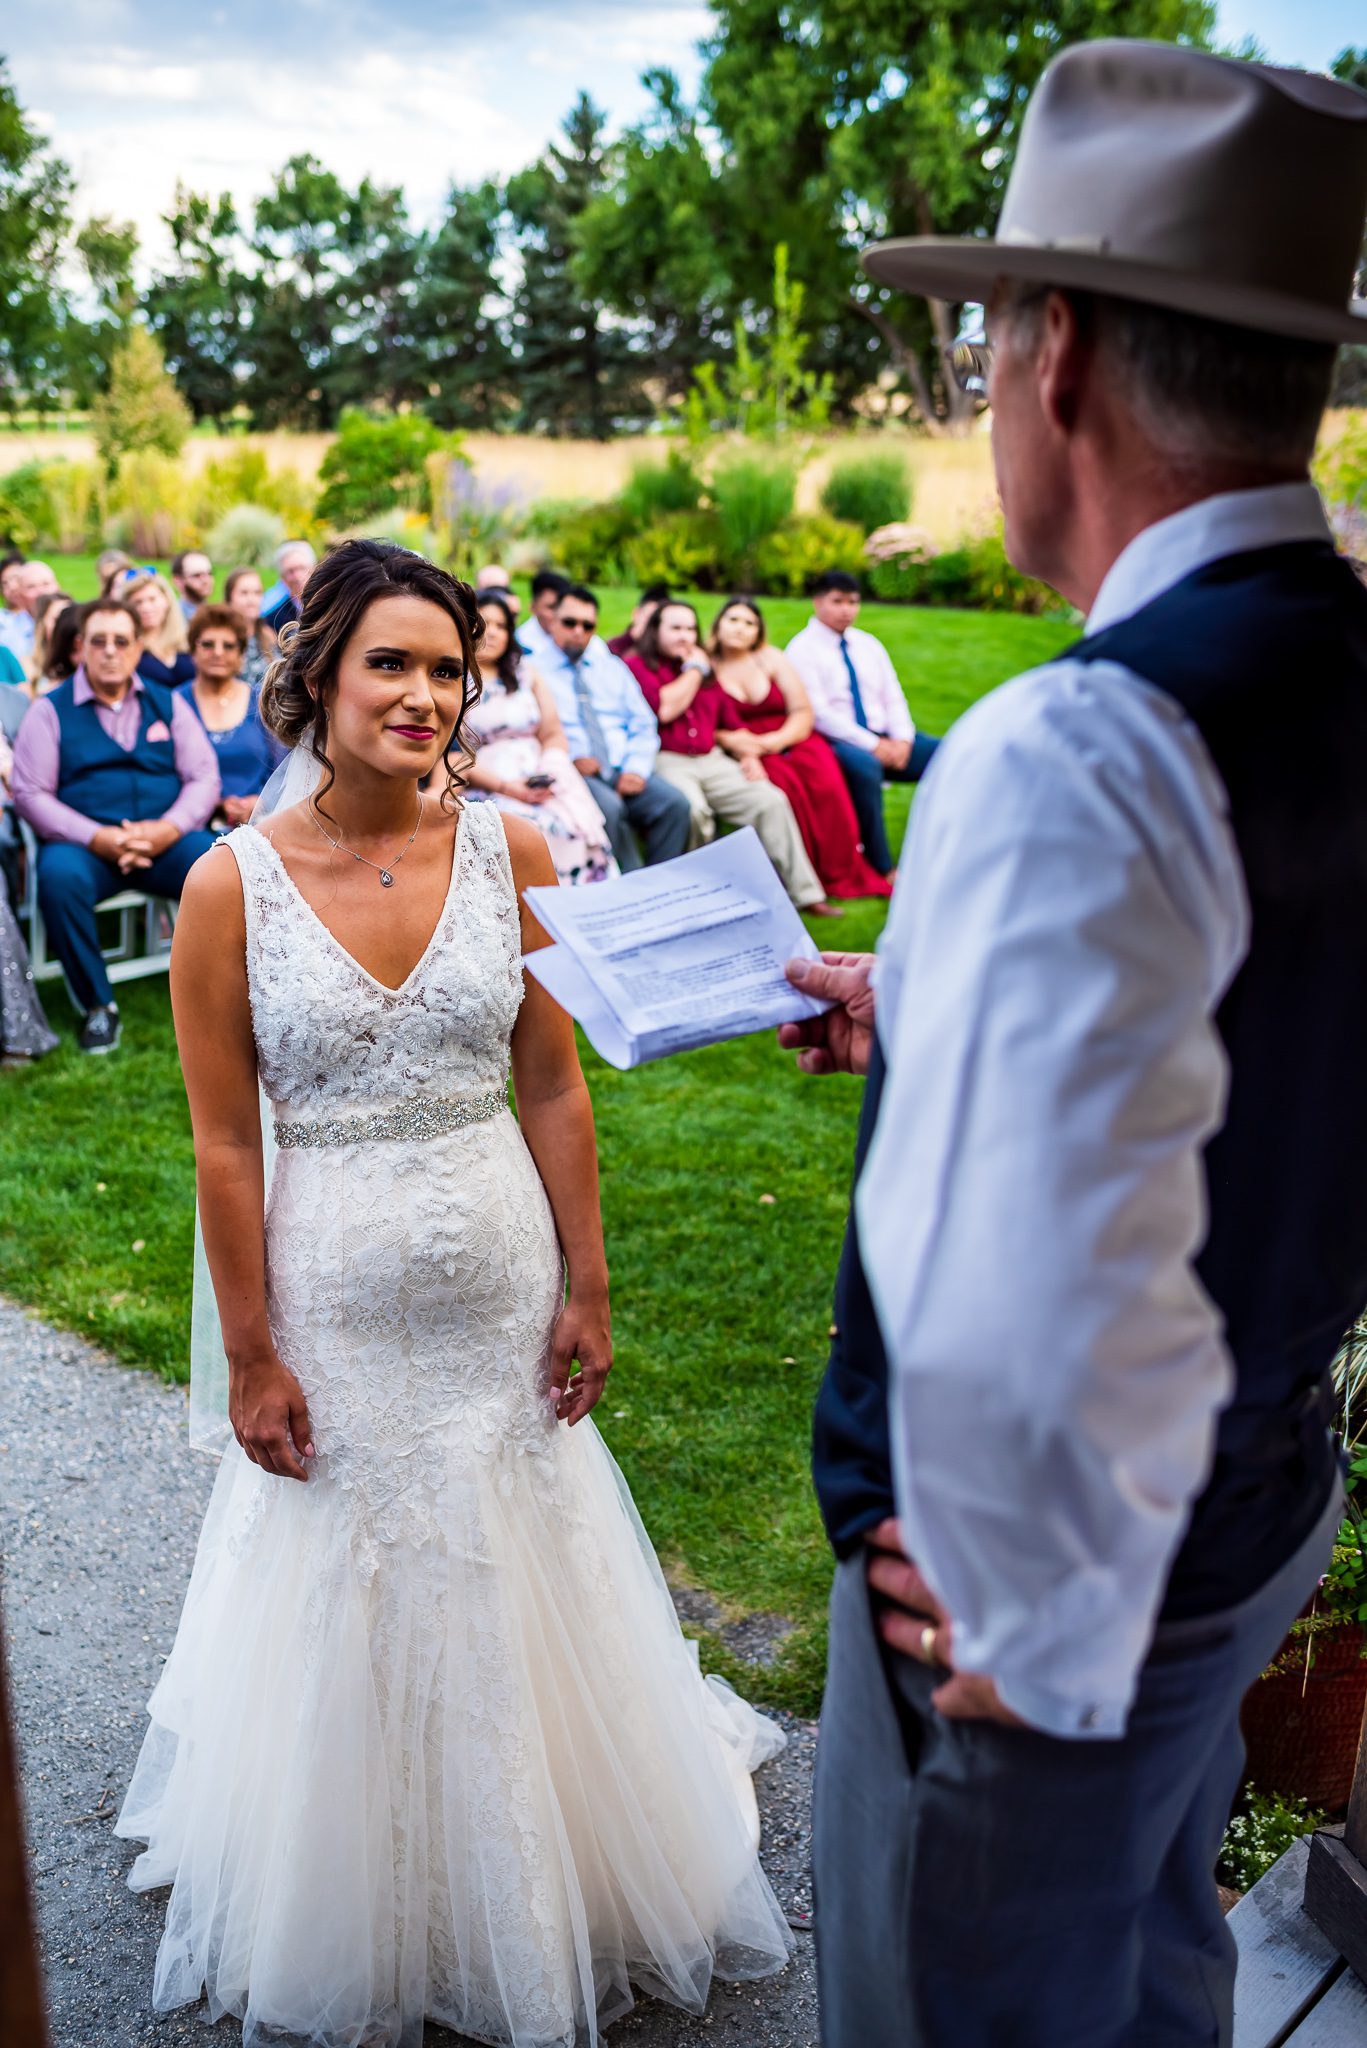 A bride looks to her uncle who officiated her wedding at Denver Botanic Gardens Chatfield Farms